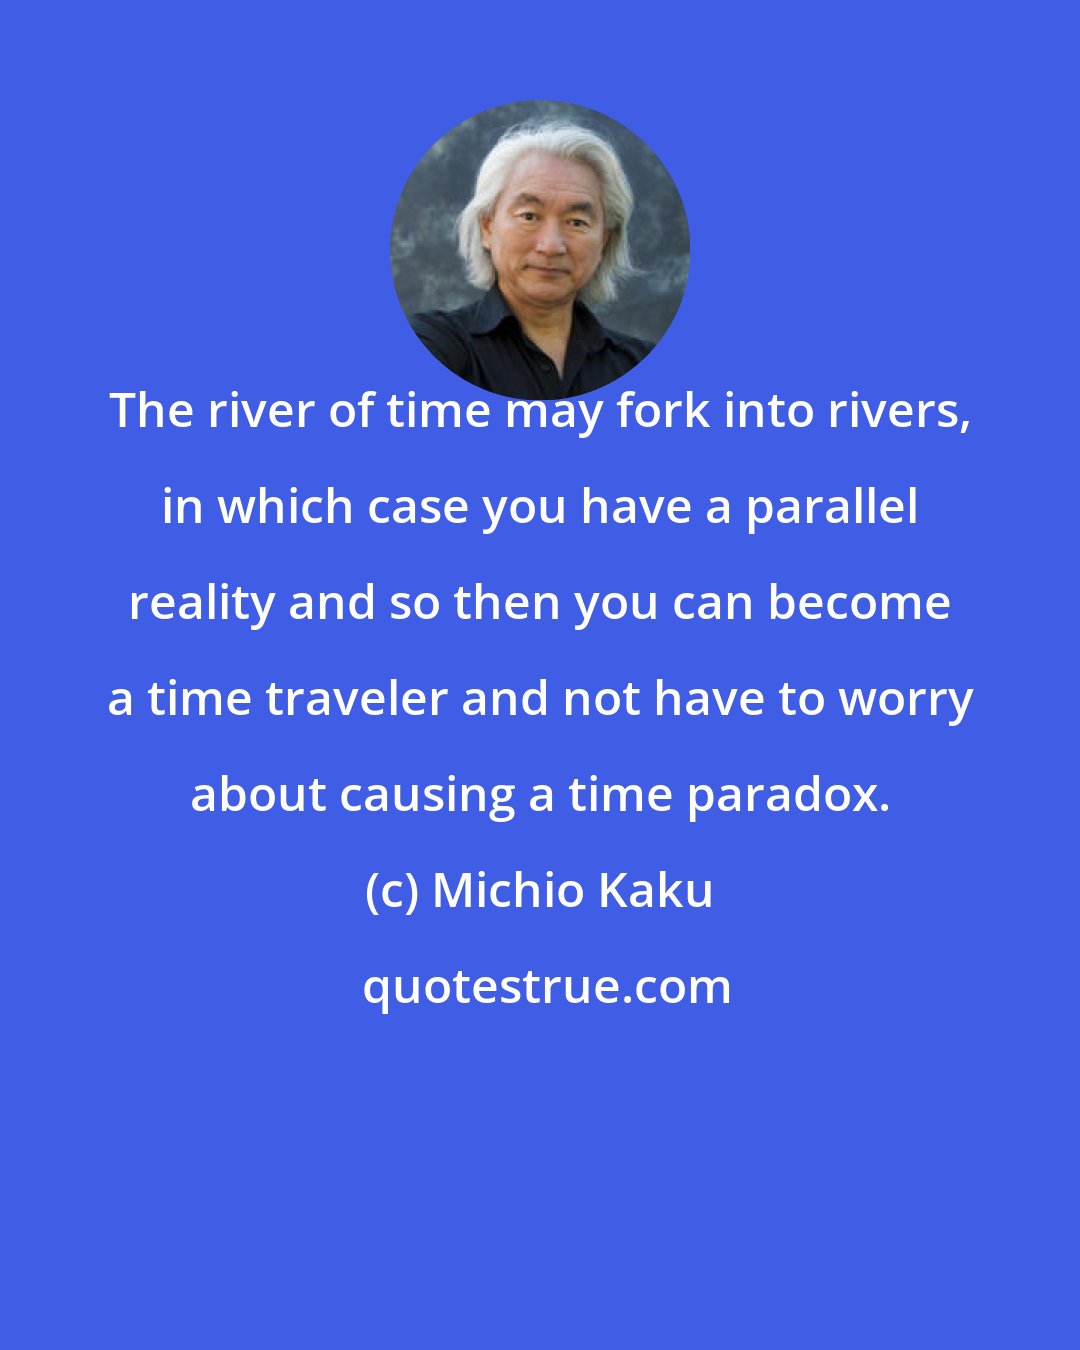 Michio Kaku: The river of time may fork into rivers, in which case you have a parallel reality and so then you can become a time traveler and not have to worry about causing a time paradox.